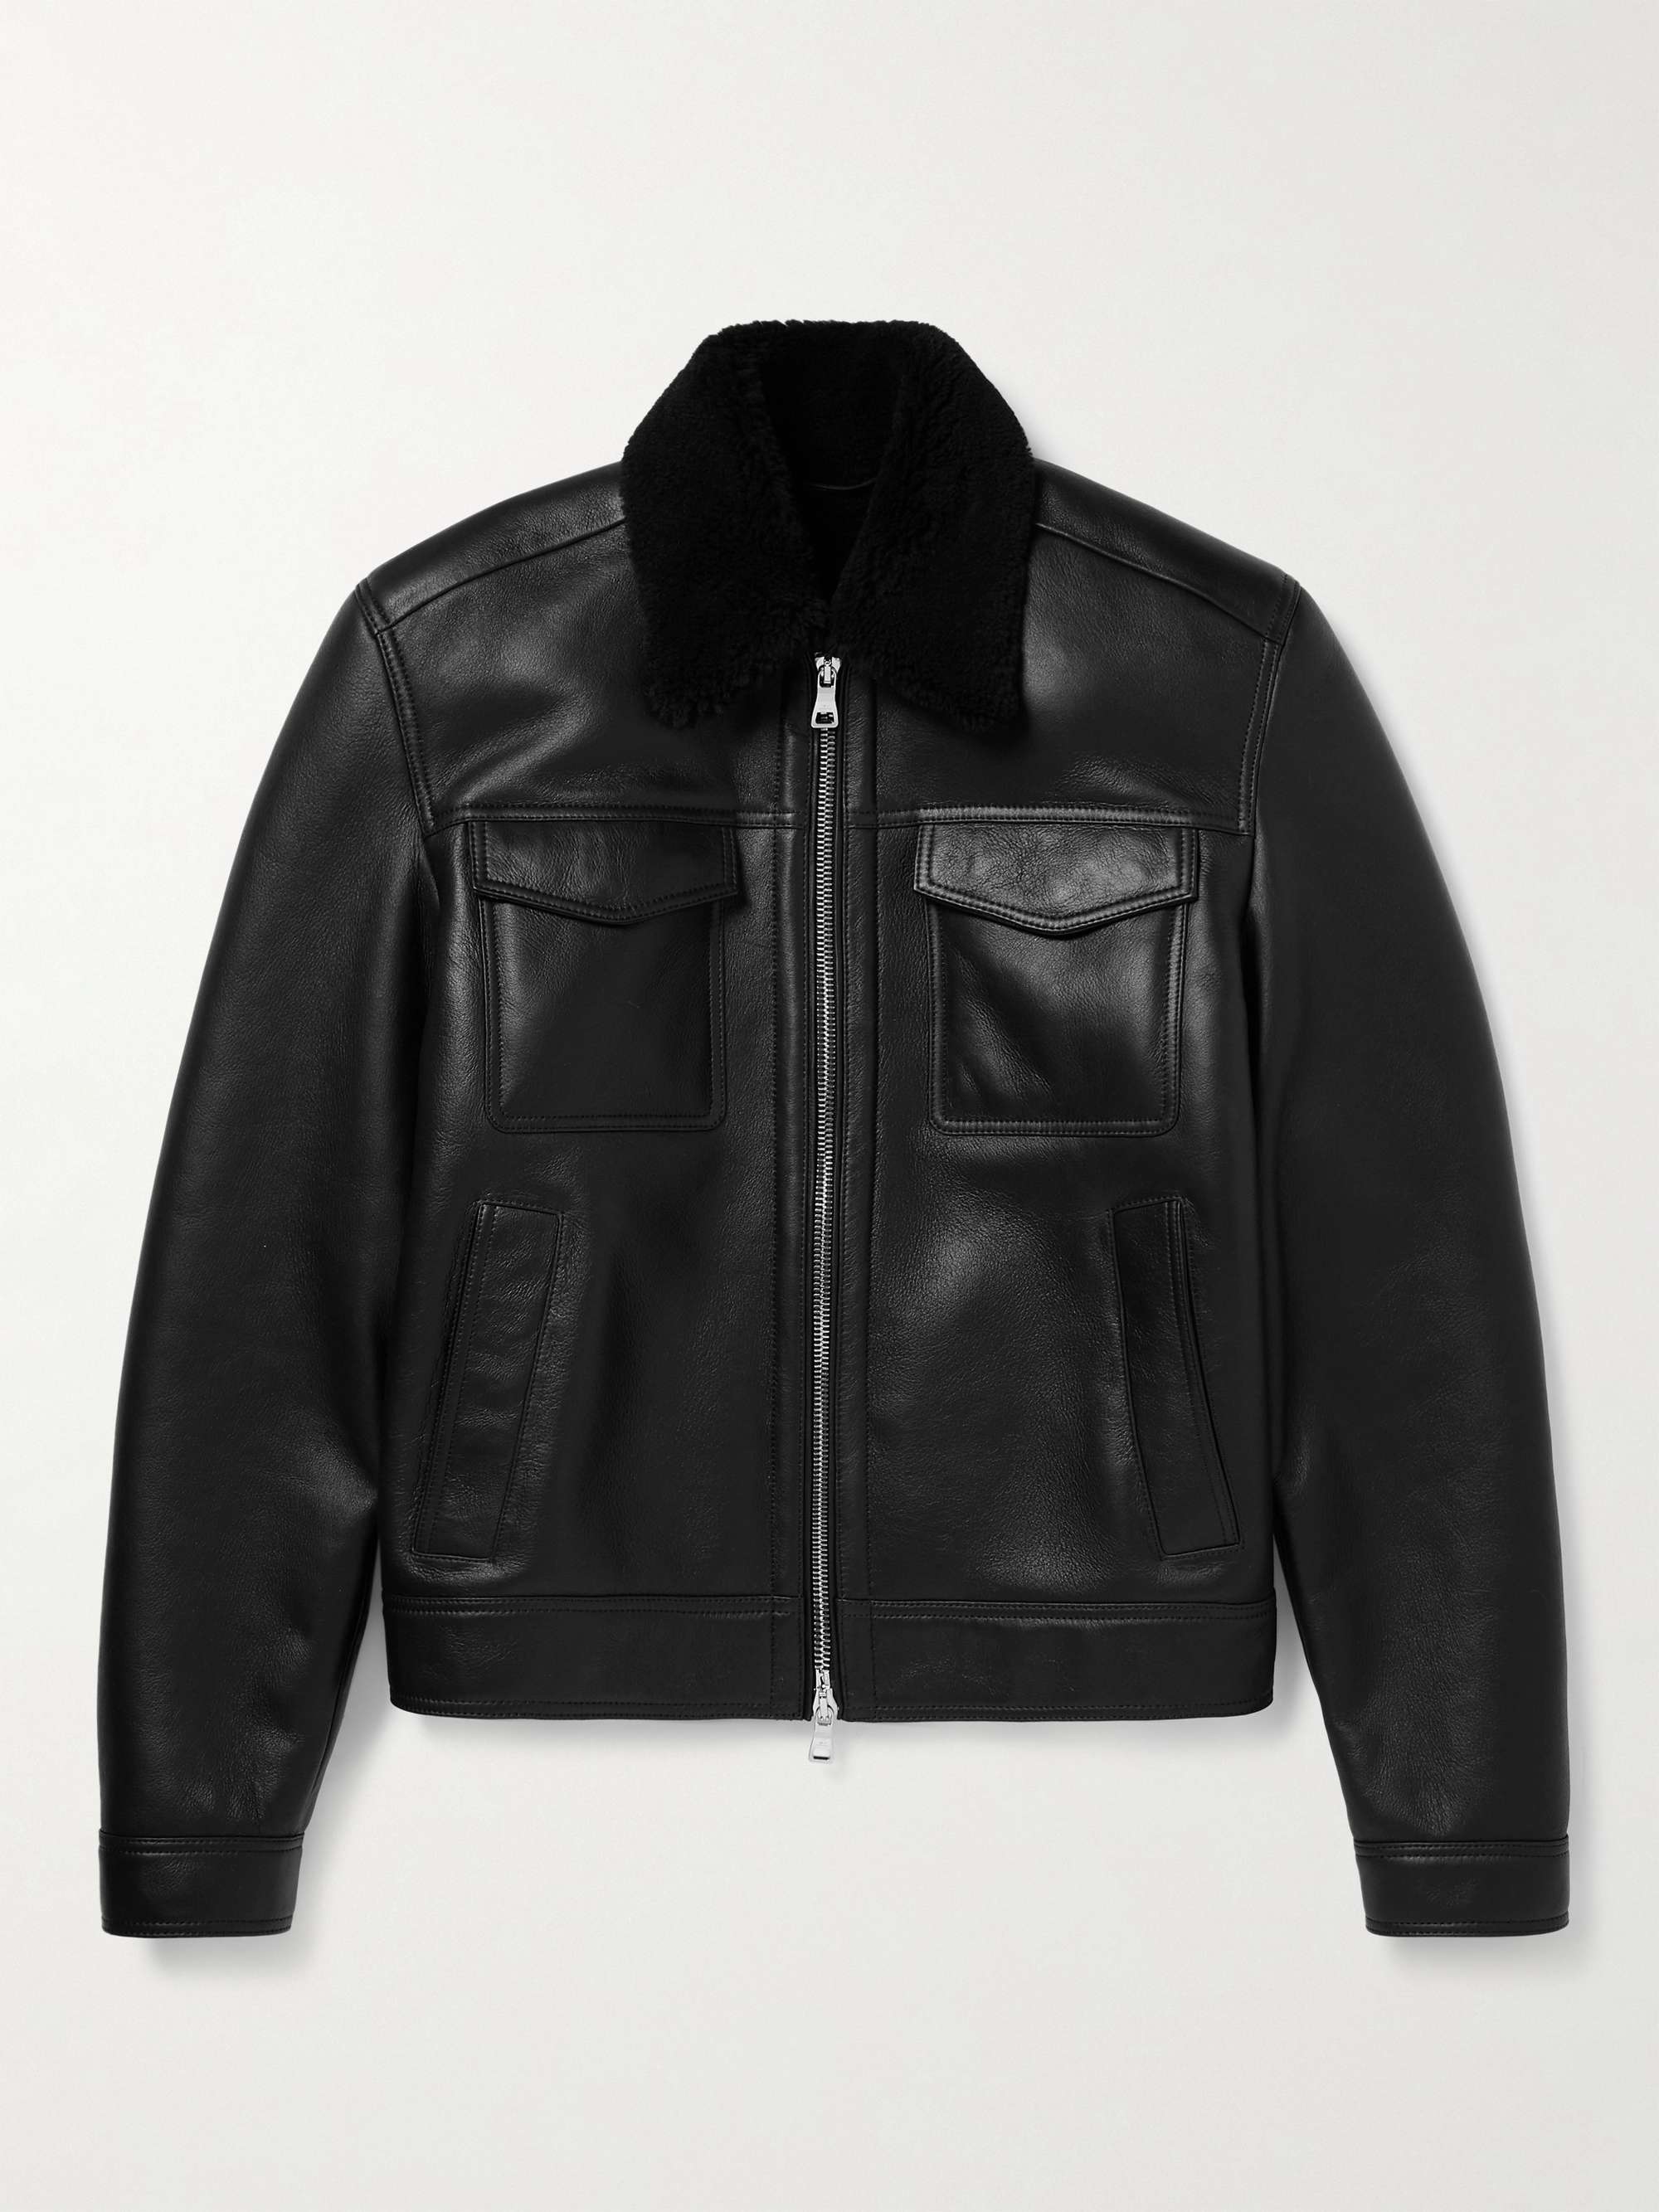 MR P. Nappa Leather and Shearling Trucker Jacket